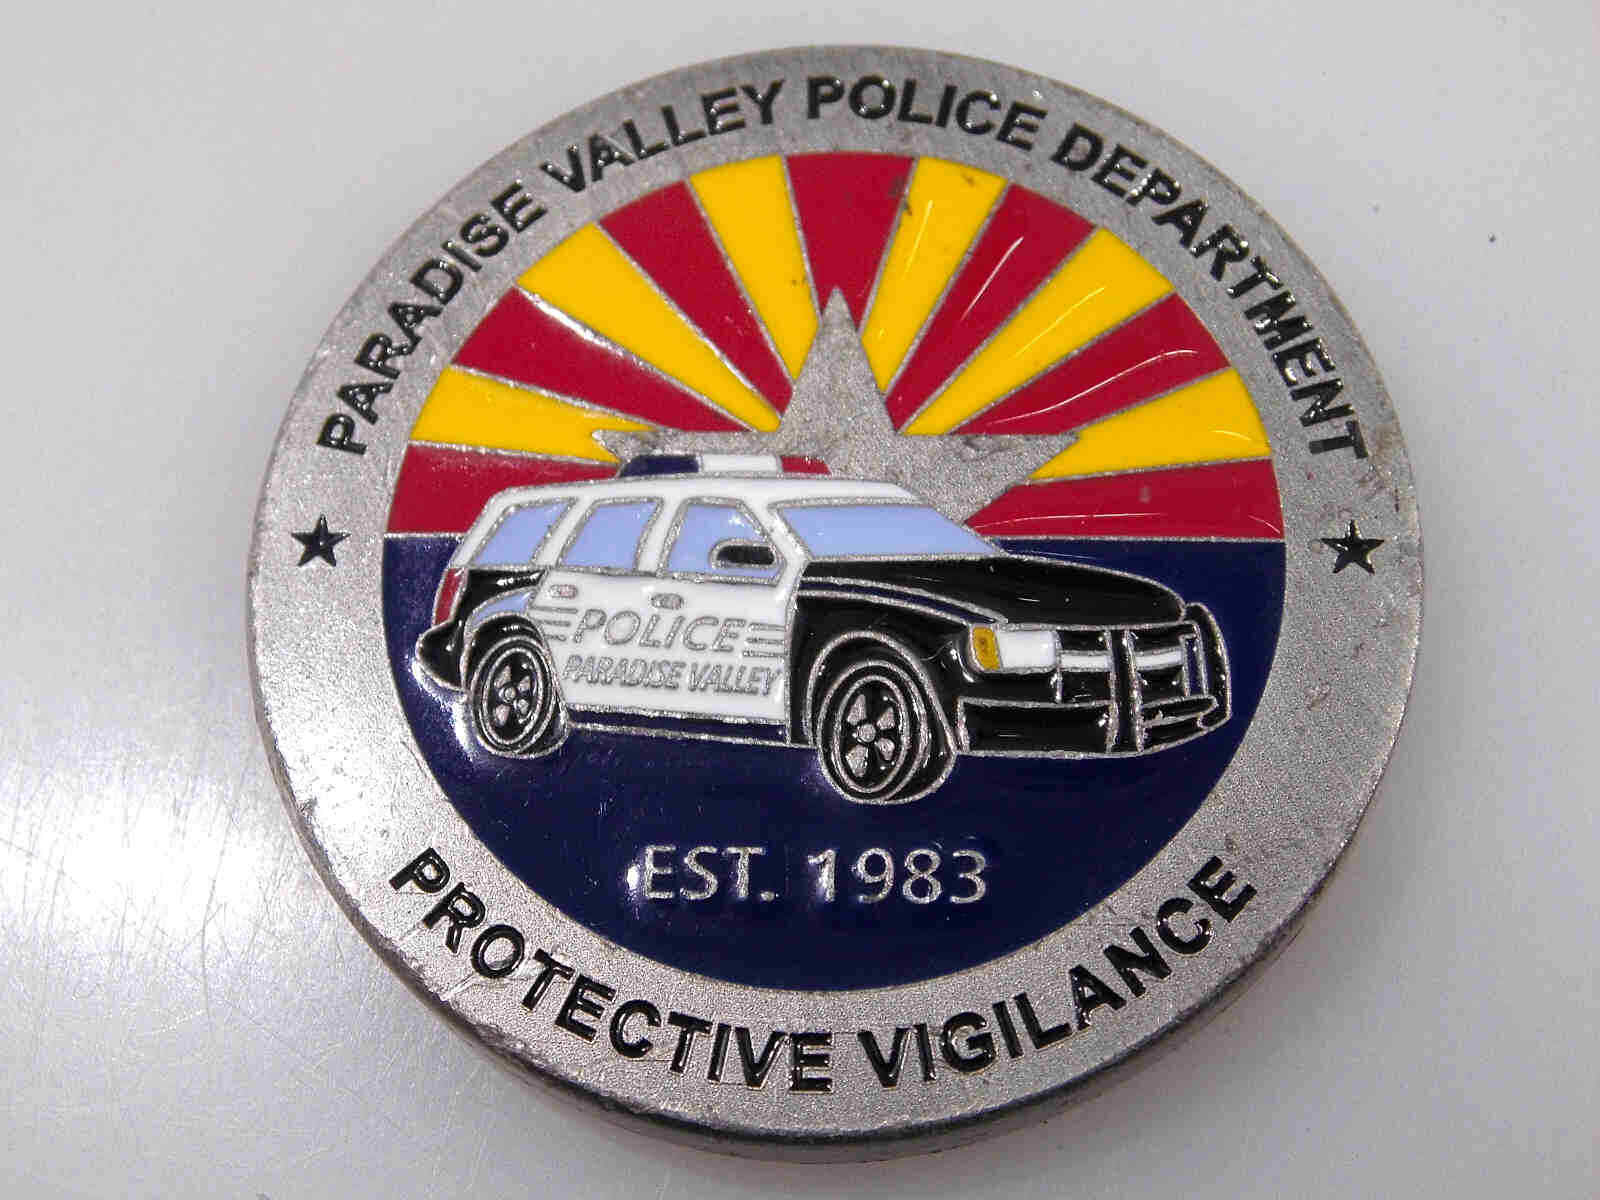 PARADISE VALLEY POLICE DEPARTMENT PROTECTIVE VIGILANCE CHALLENGE COIN